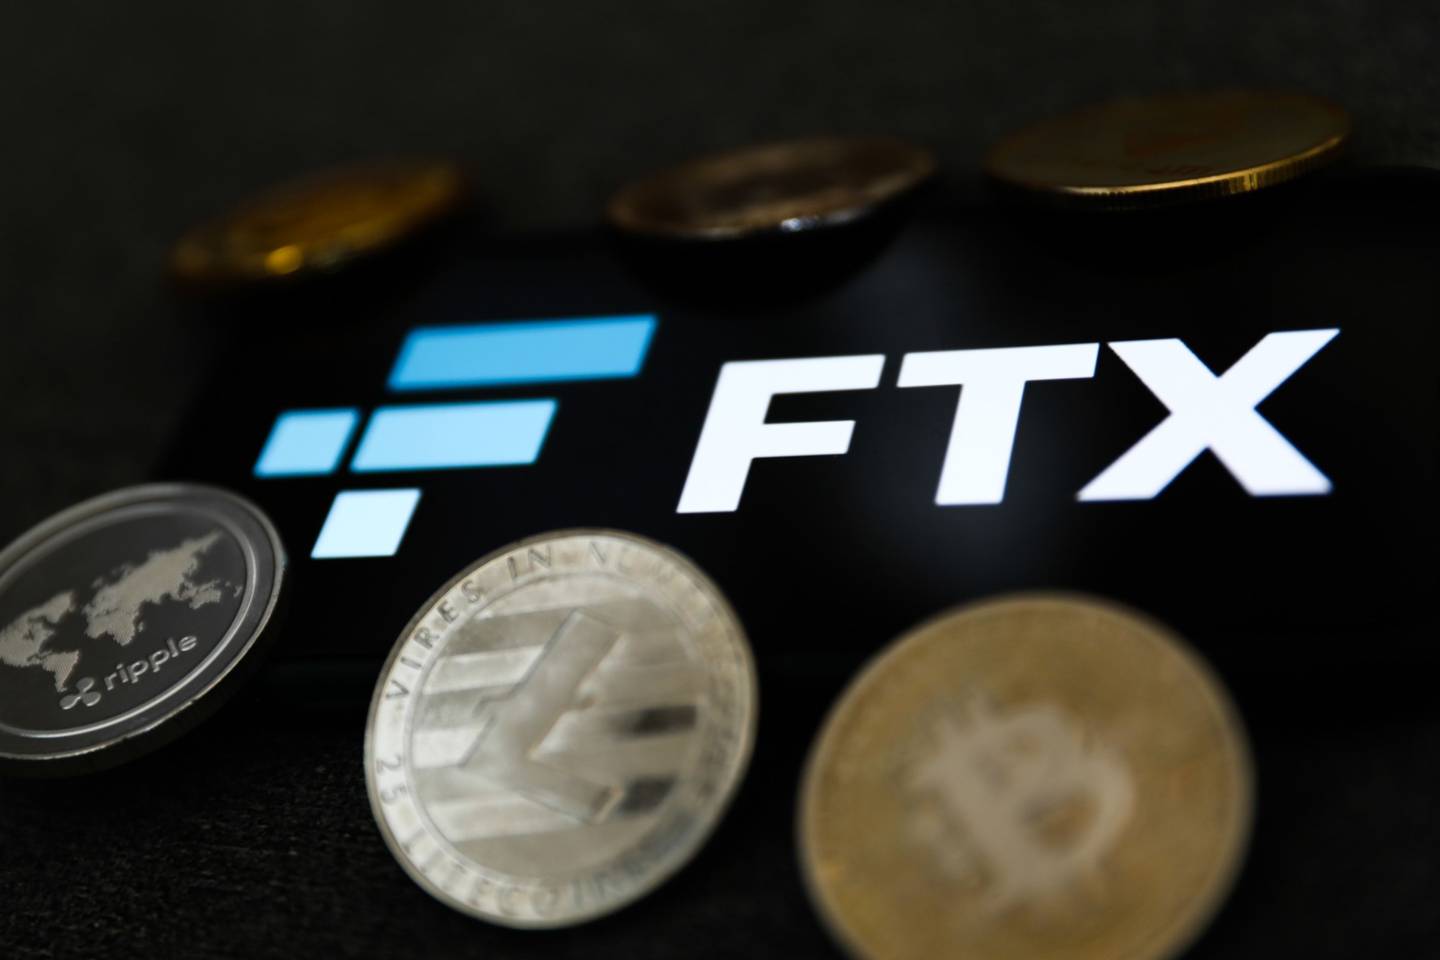 FTX logo displayed on a phone screen and representation of cryptocurrency are seen in this illustration photo taken in Krakow, Poland on February 16, 2022. Photographer: Jakub Porzycki/NurPhoto/Getty Images